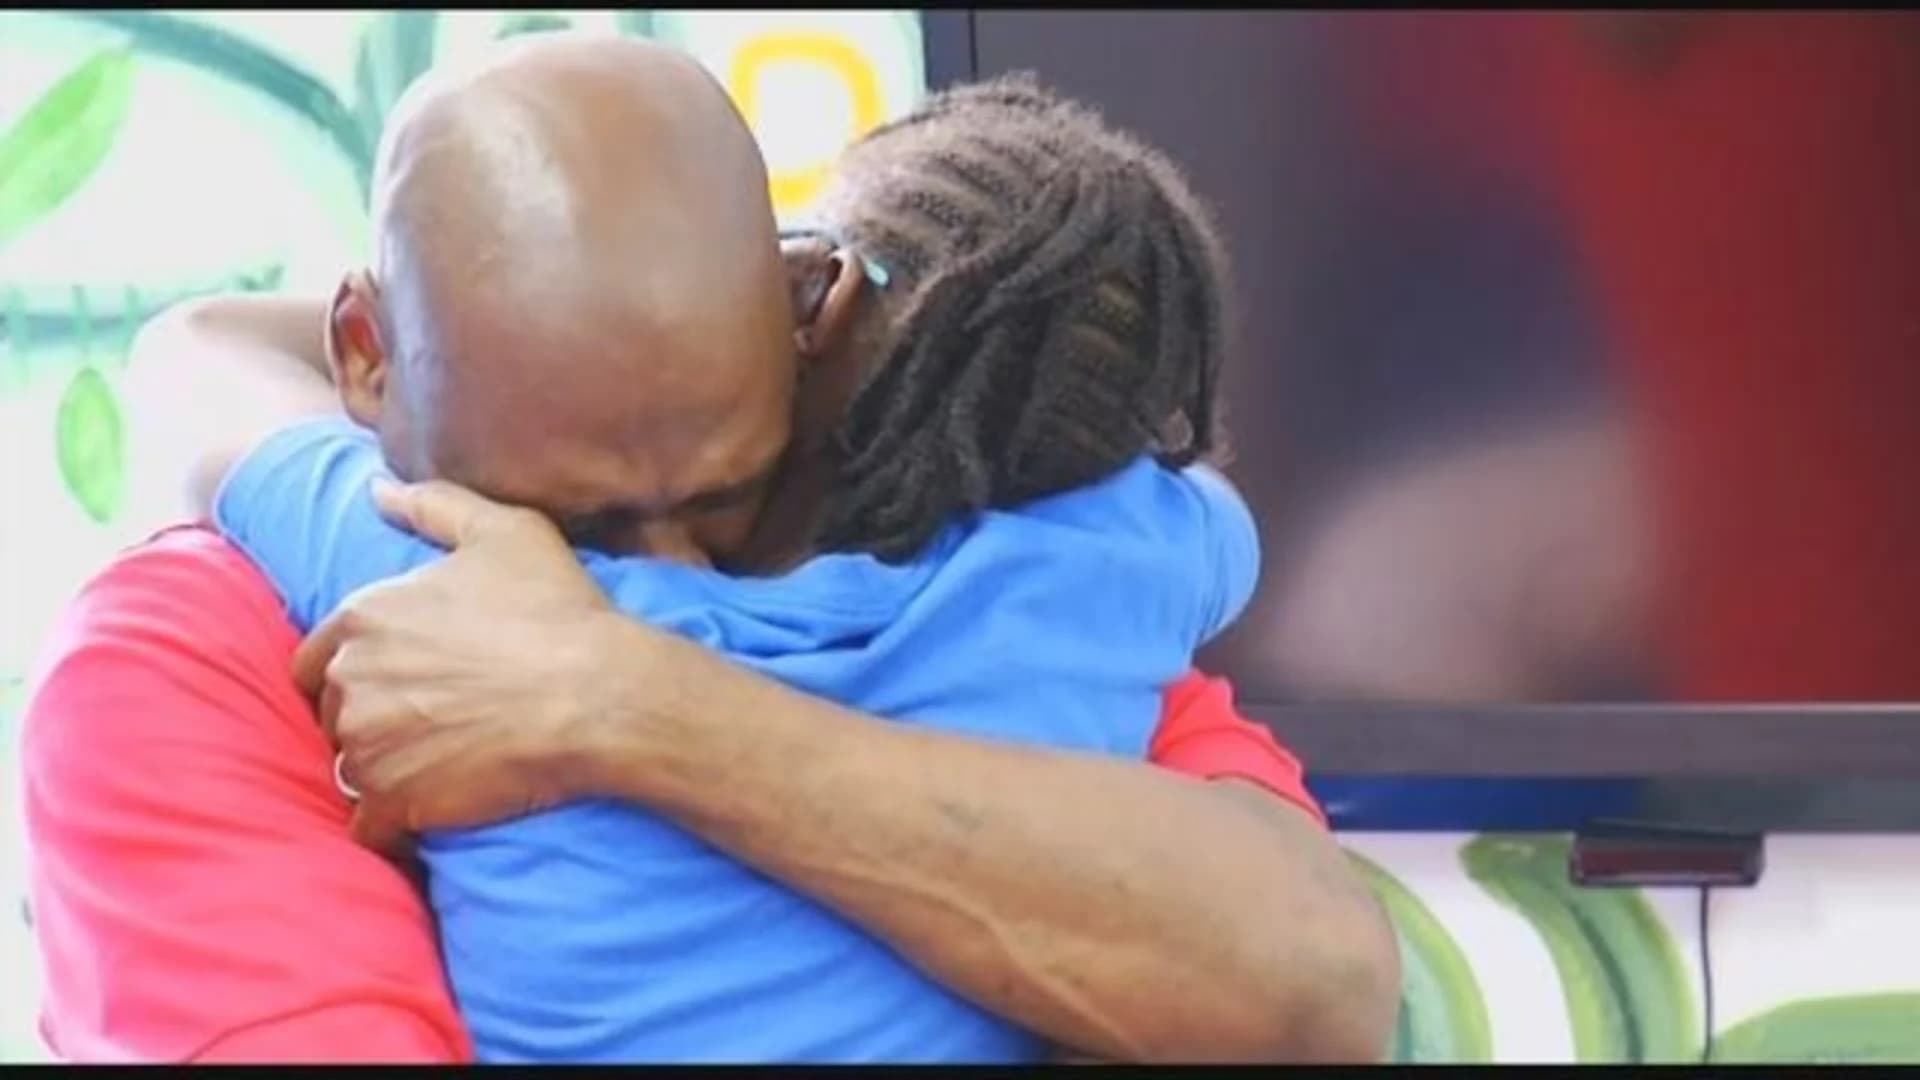 Man surprises daughter, vows to make up lost time after prison